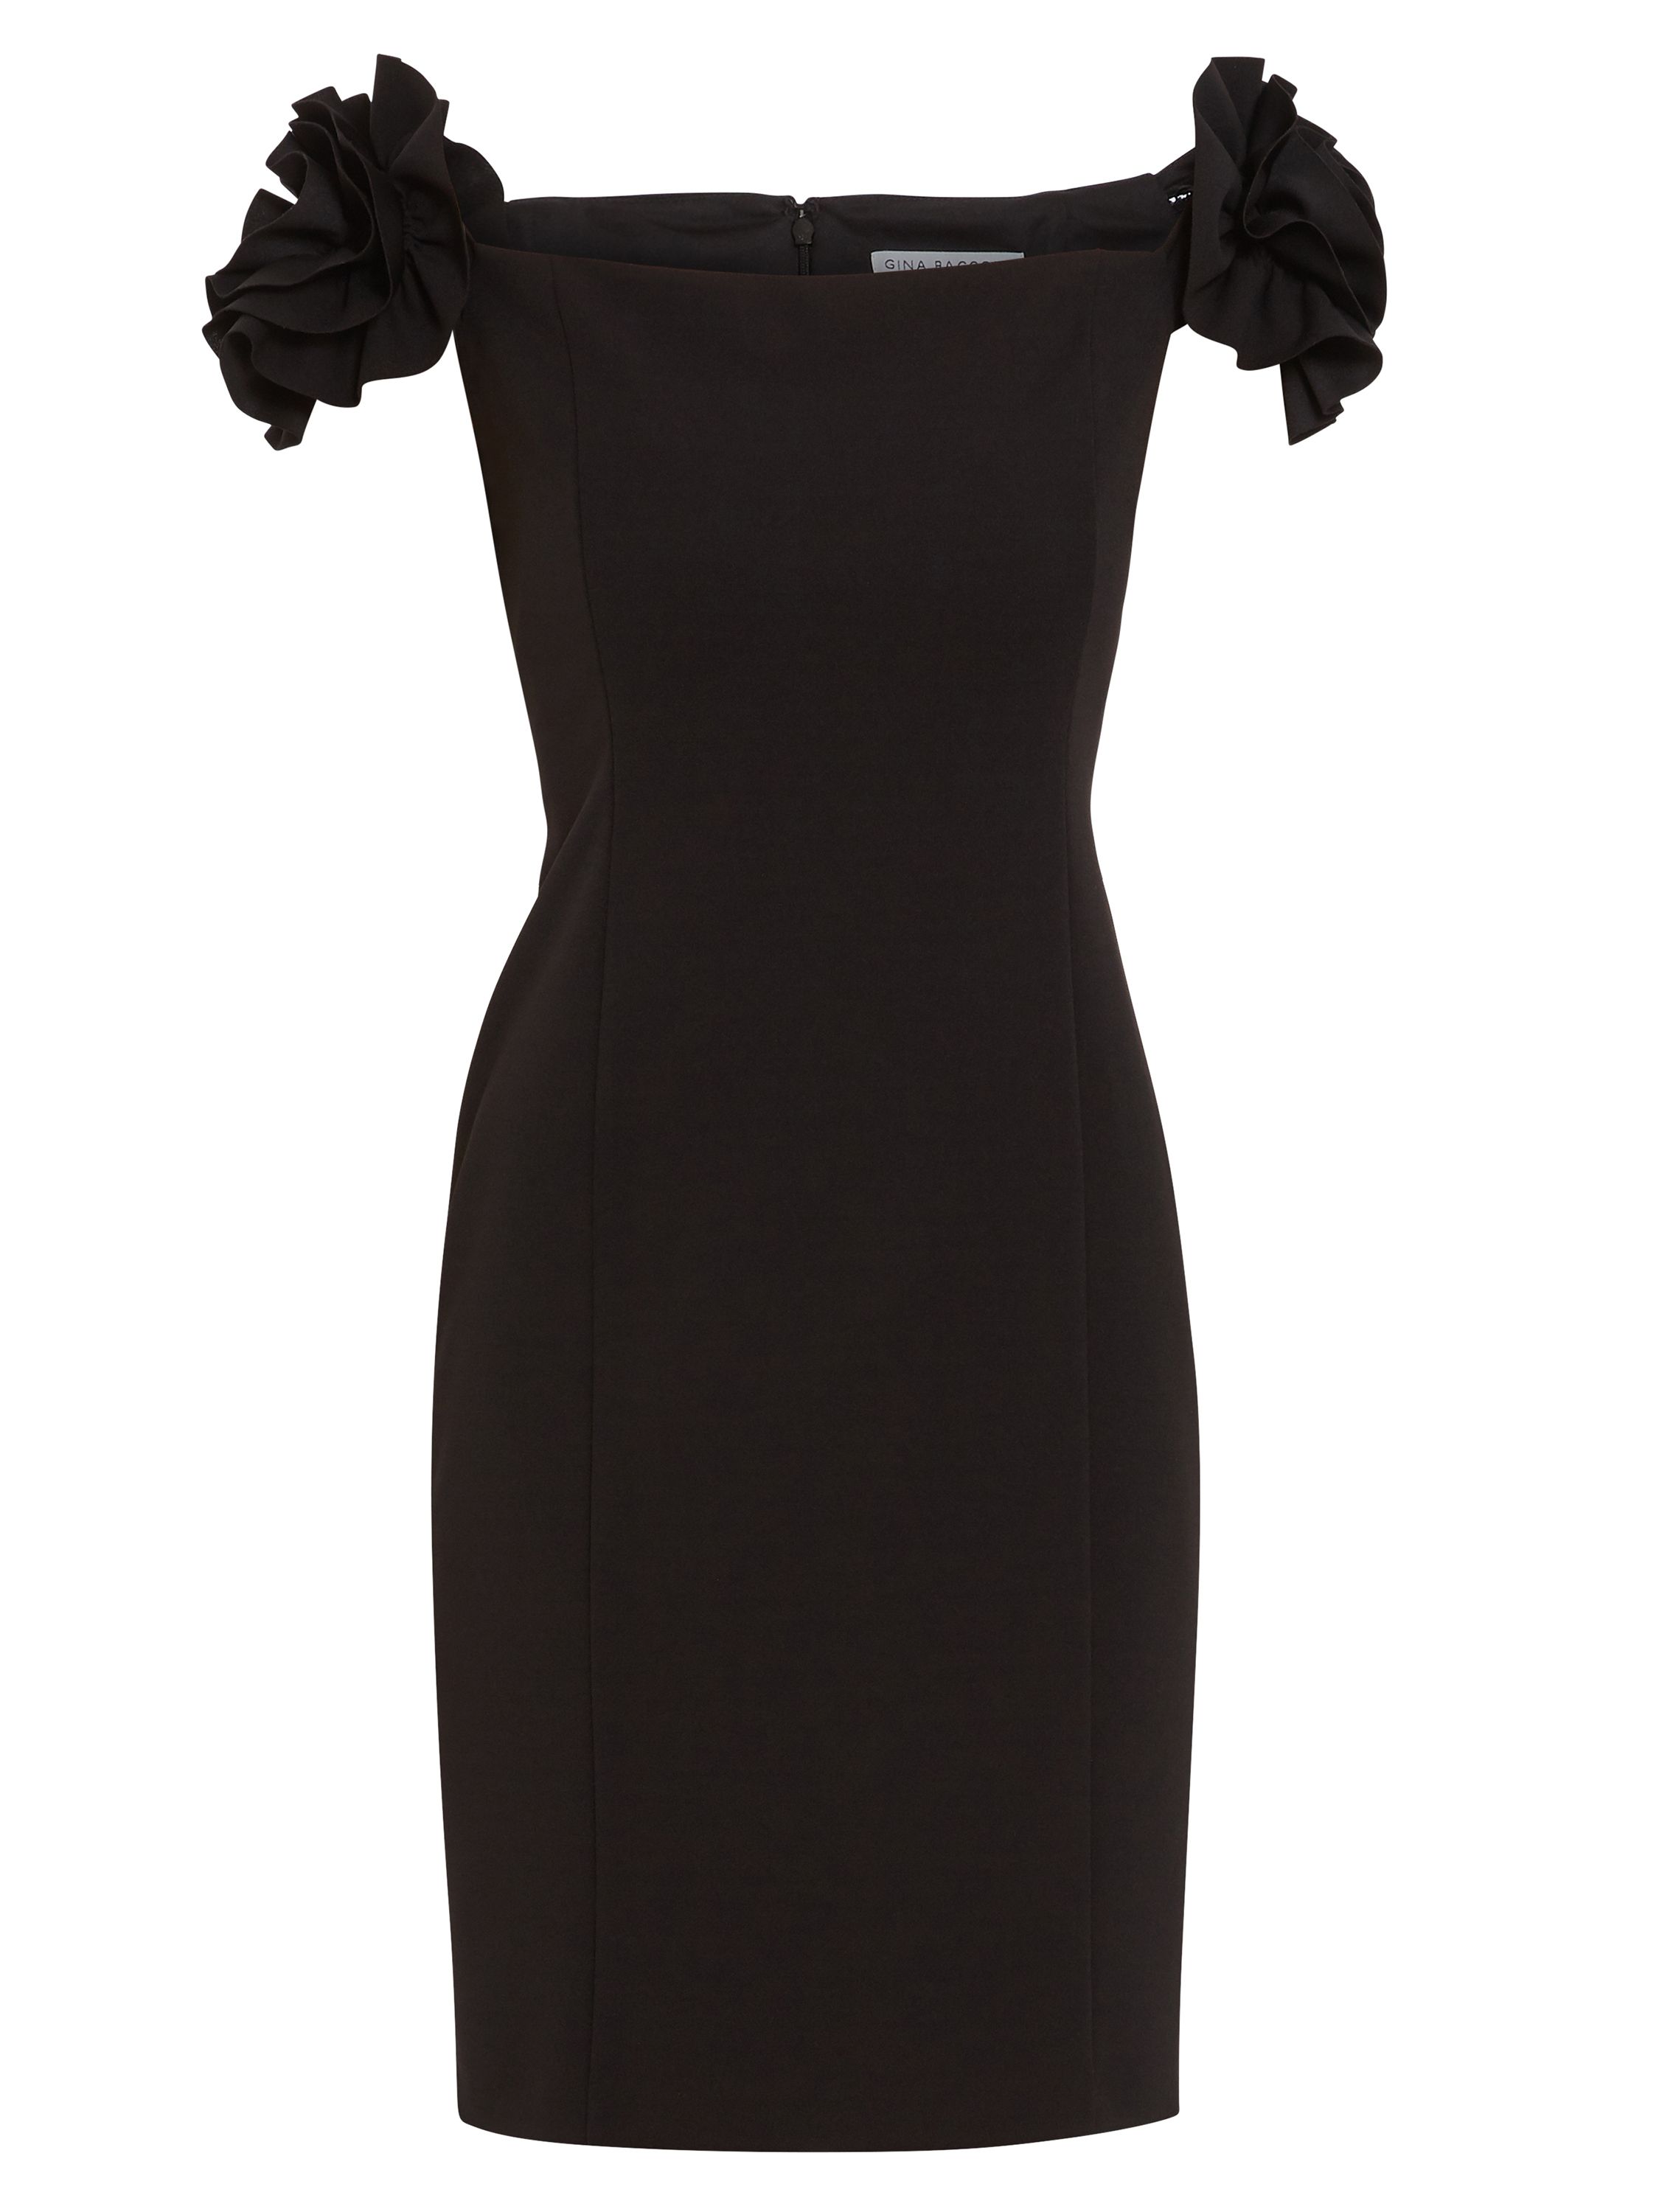 This glamorous stretch crepe dress by Gina Bacconi will make you feel stunning. The off the shoulder neckline with ruffle detailing adds an elegant finish. It is fully lined and fastened with a concealed back zip. Perfect for a party or a special occasion.